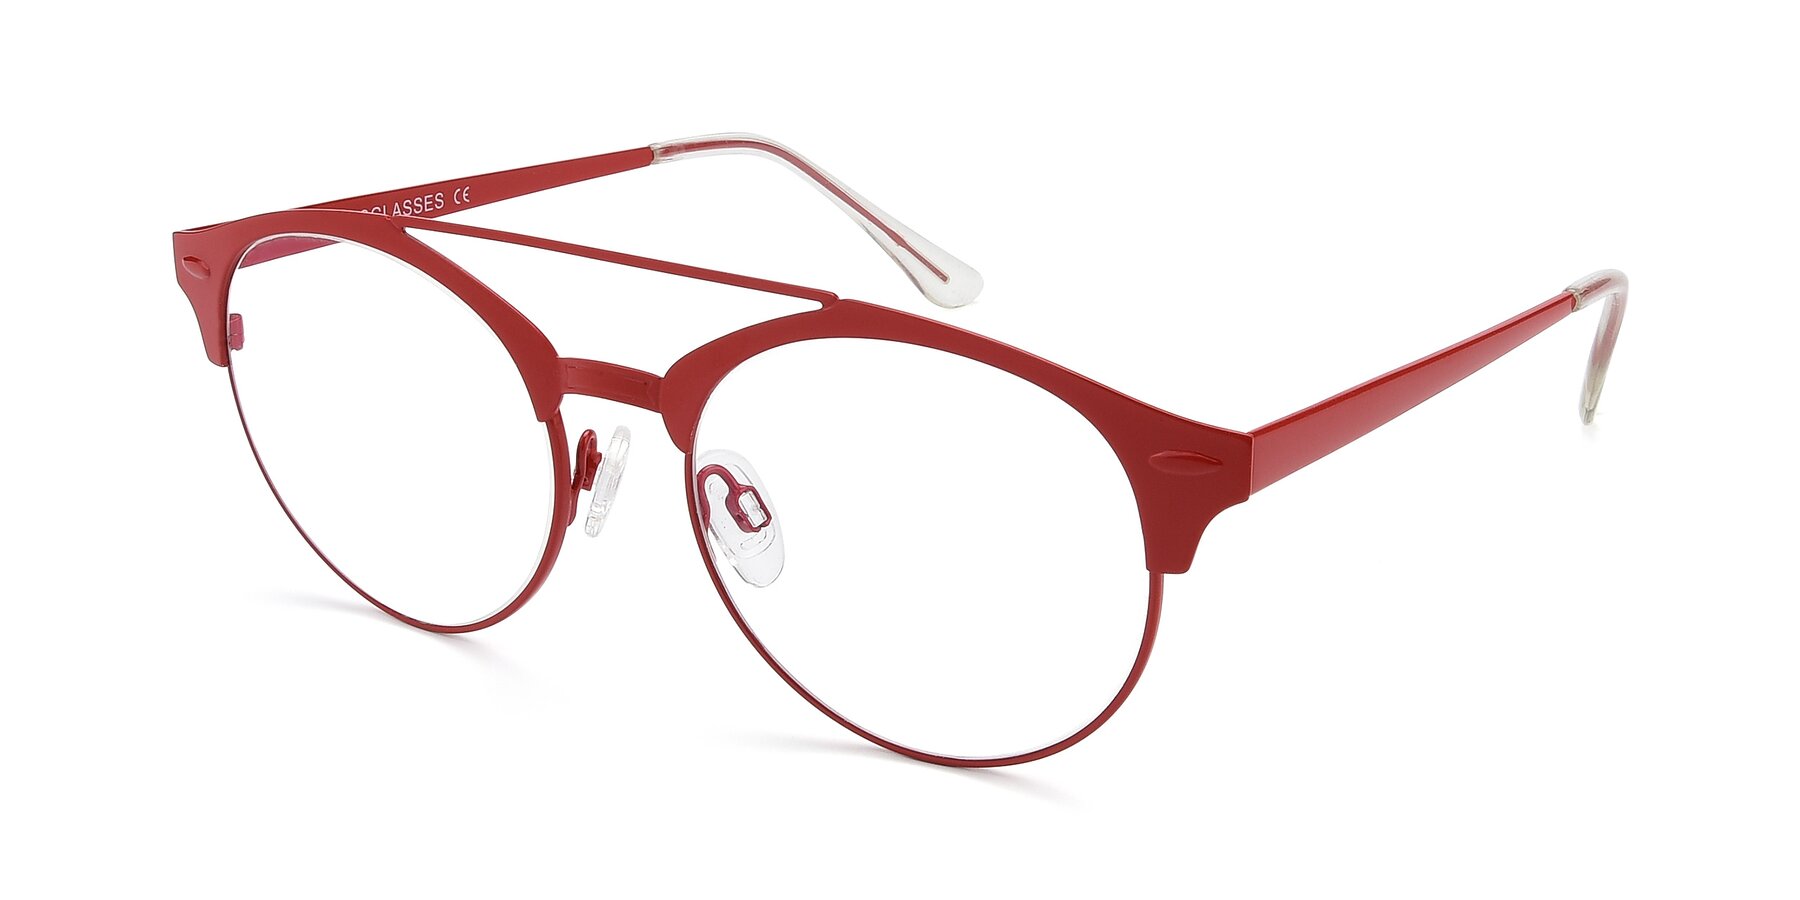 Angle of SSR183 in Red with Clear Reading Eyeglass Lenses